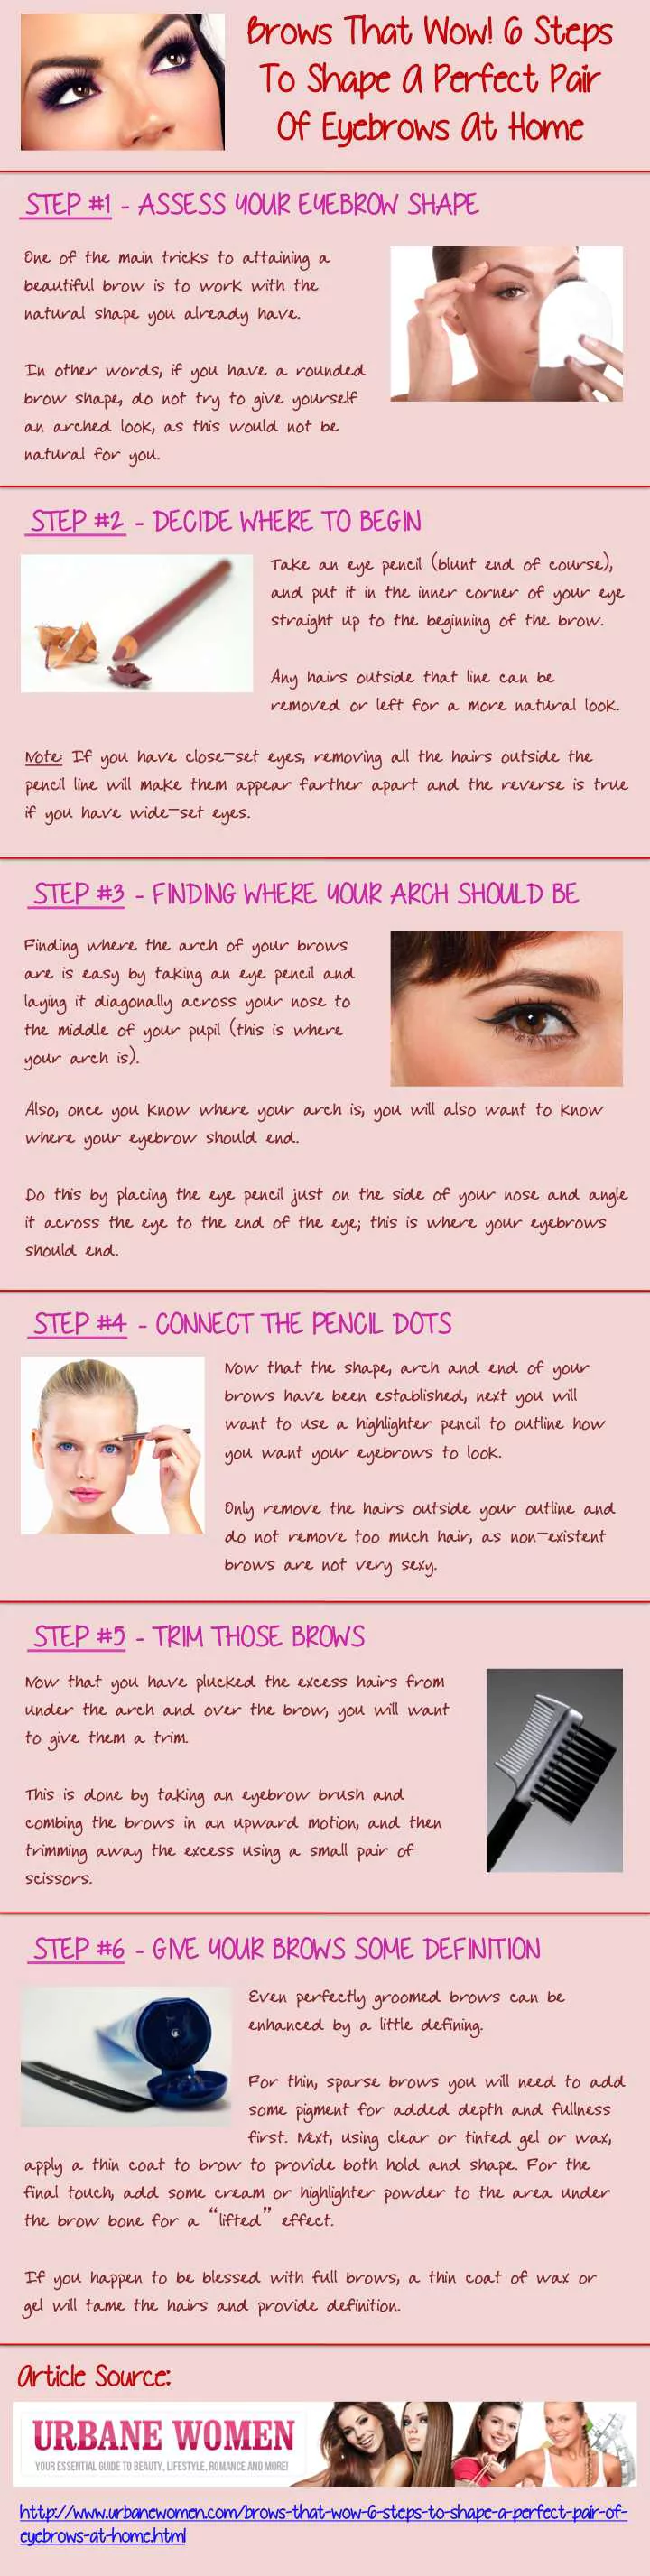 6 Steps To Shape A Perfect Pair Of Eyebrows